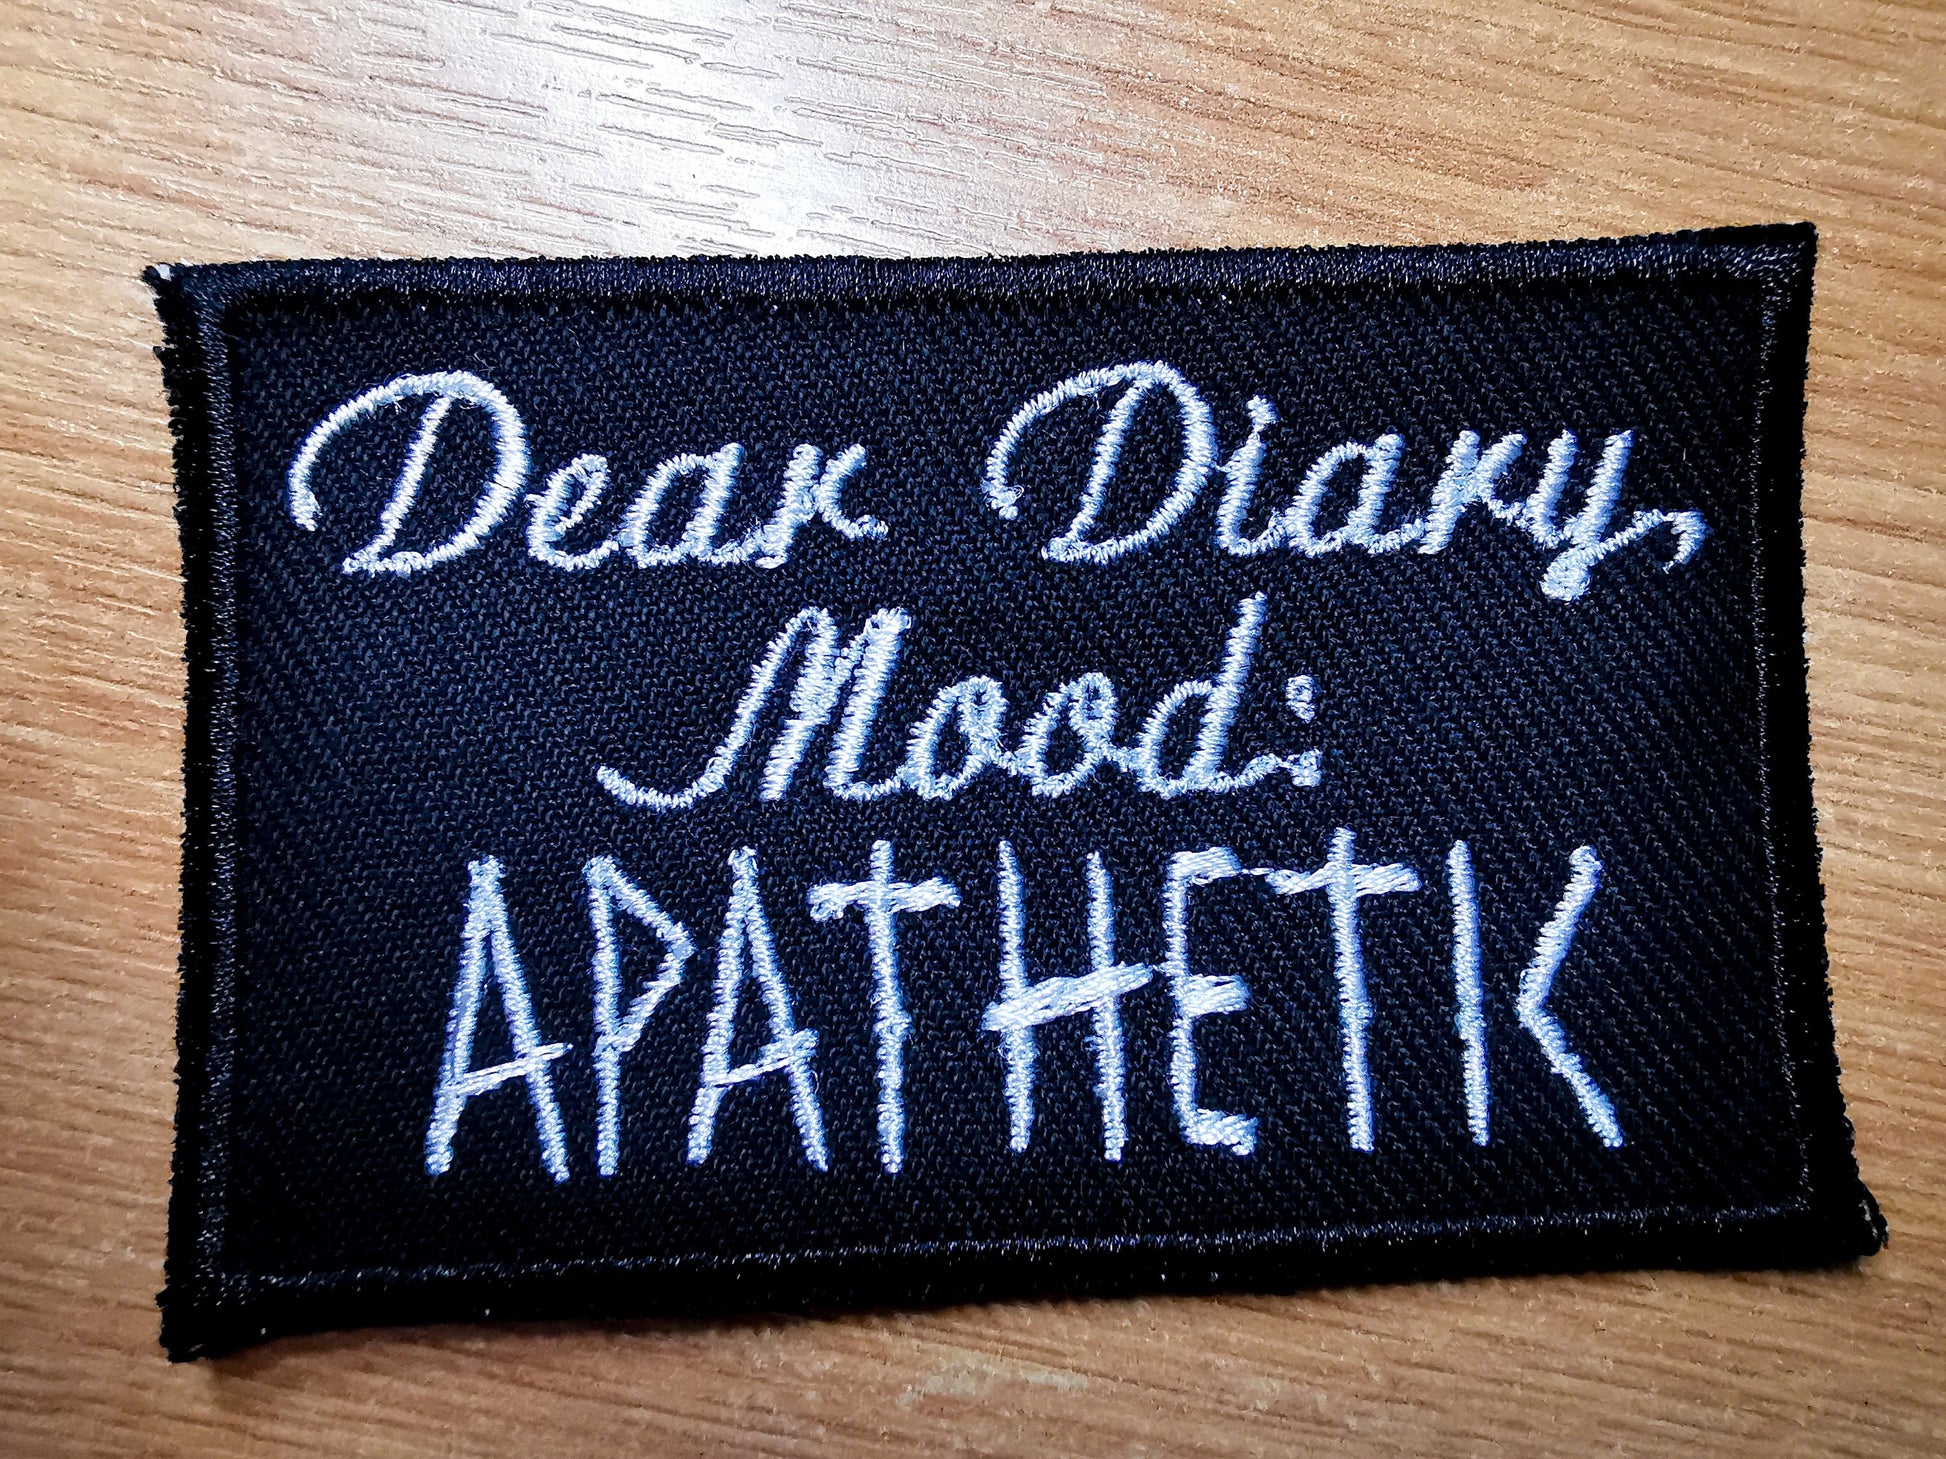 Emo Throwback Embroidered Patch Dear Diary Mood Apathetic Funny Patch –  socialrebellionpatches